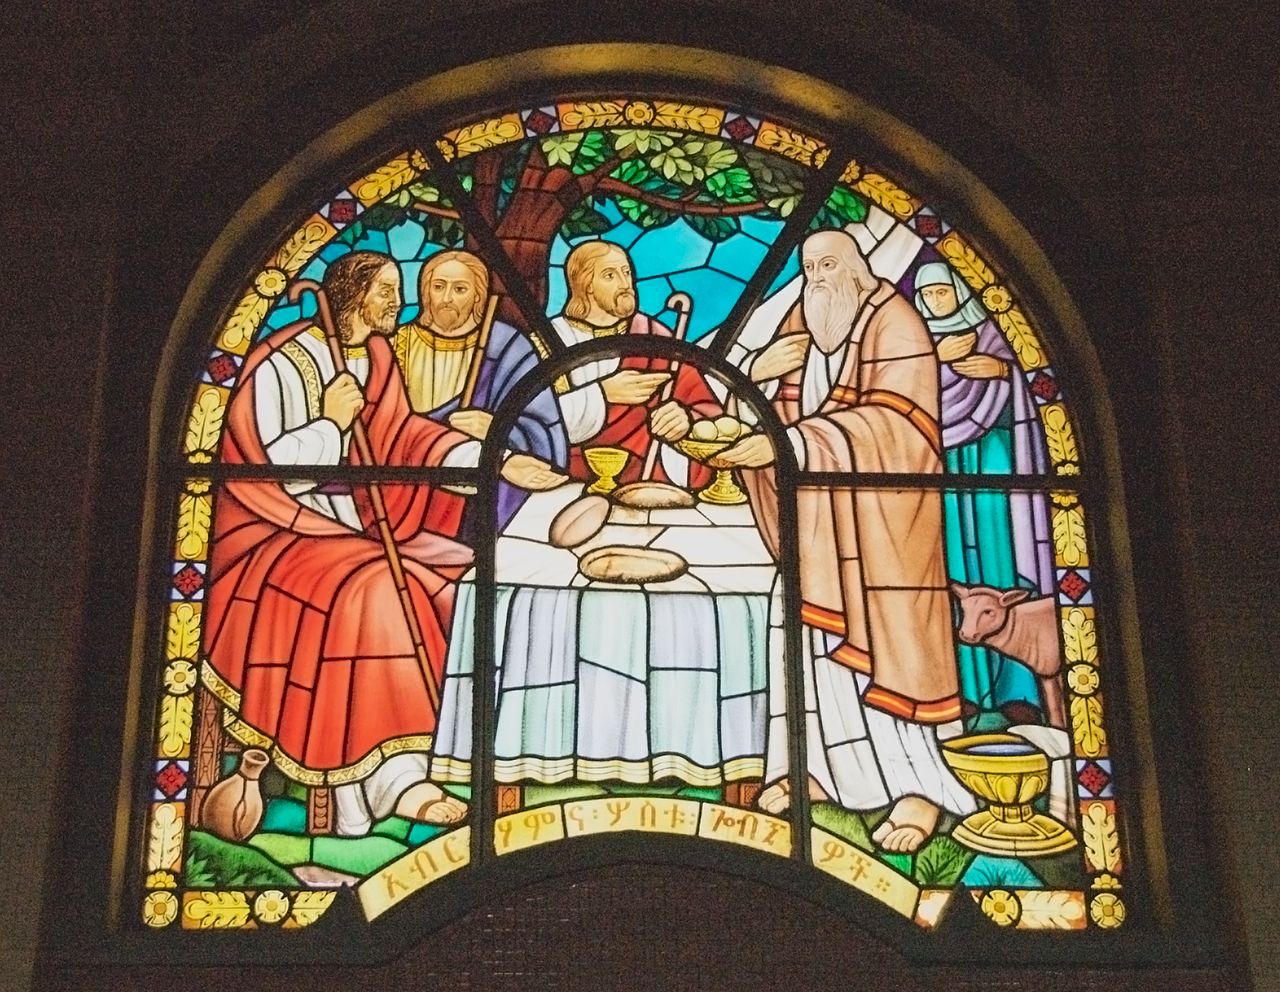 1280px-stained_glass_window_holy_trinity_cathedral_addis_ababa_ethiopia_3434778977